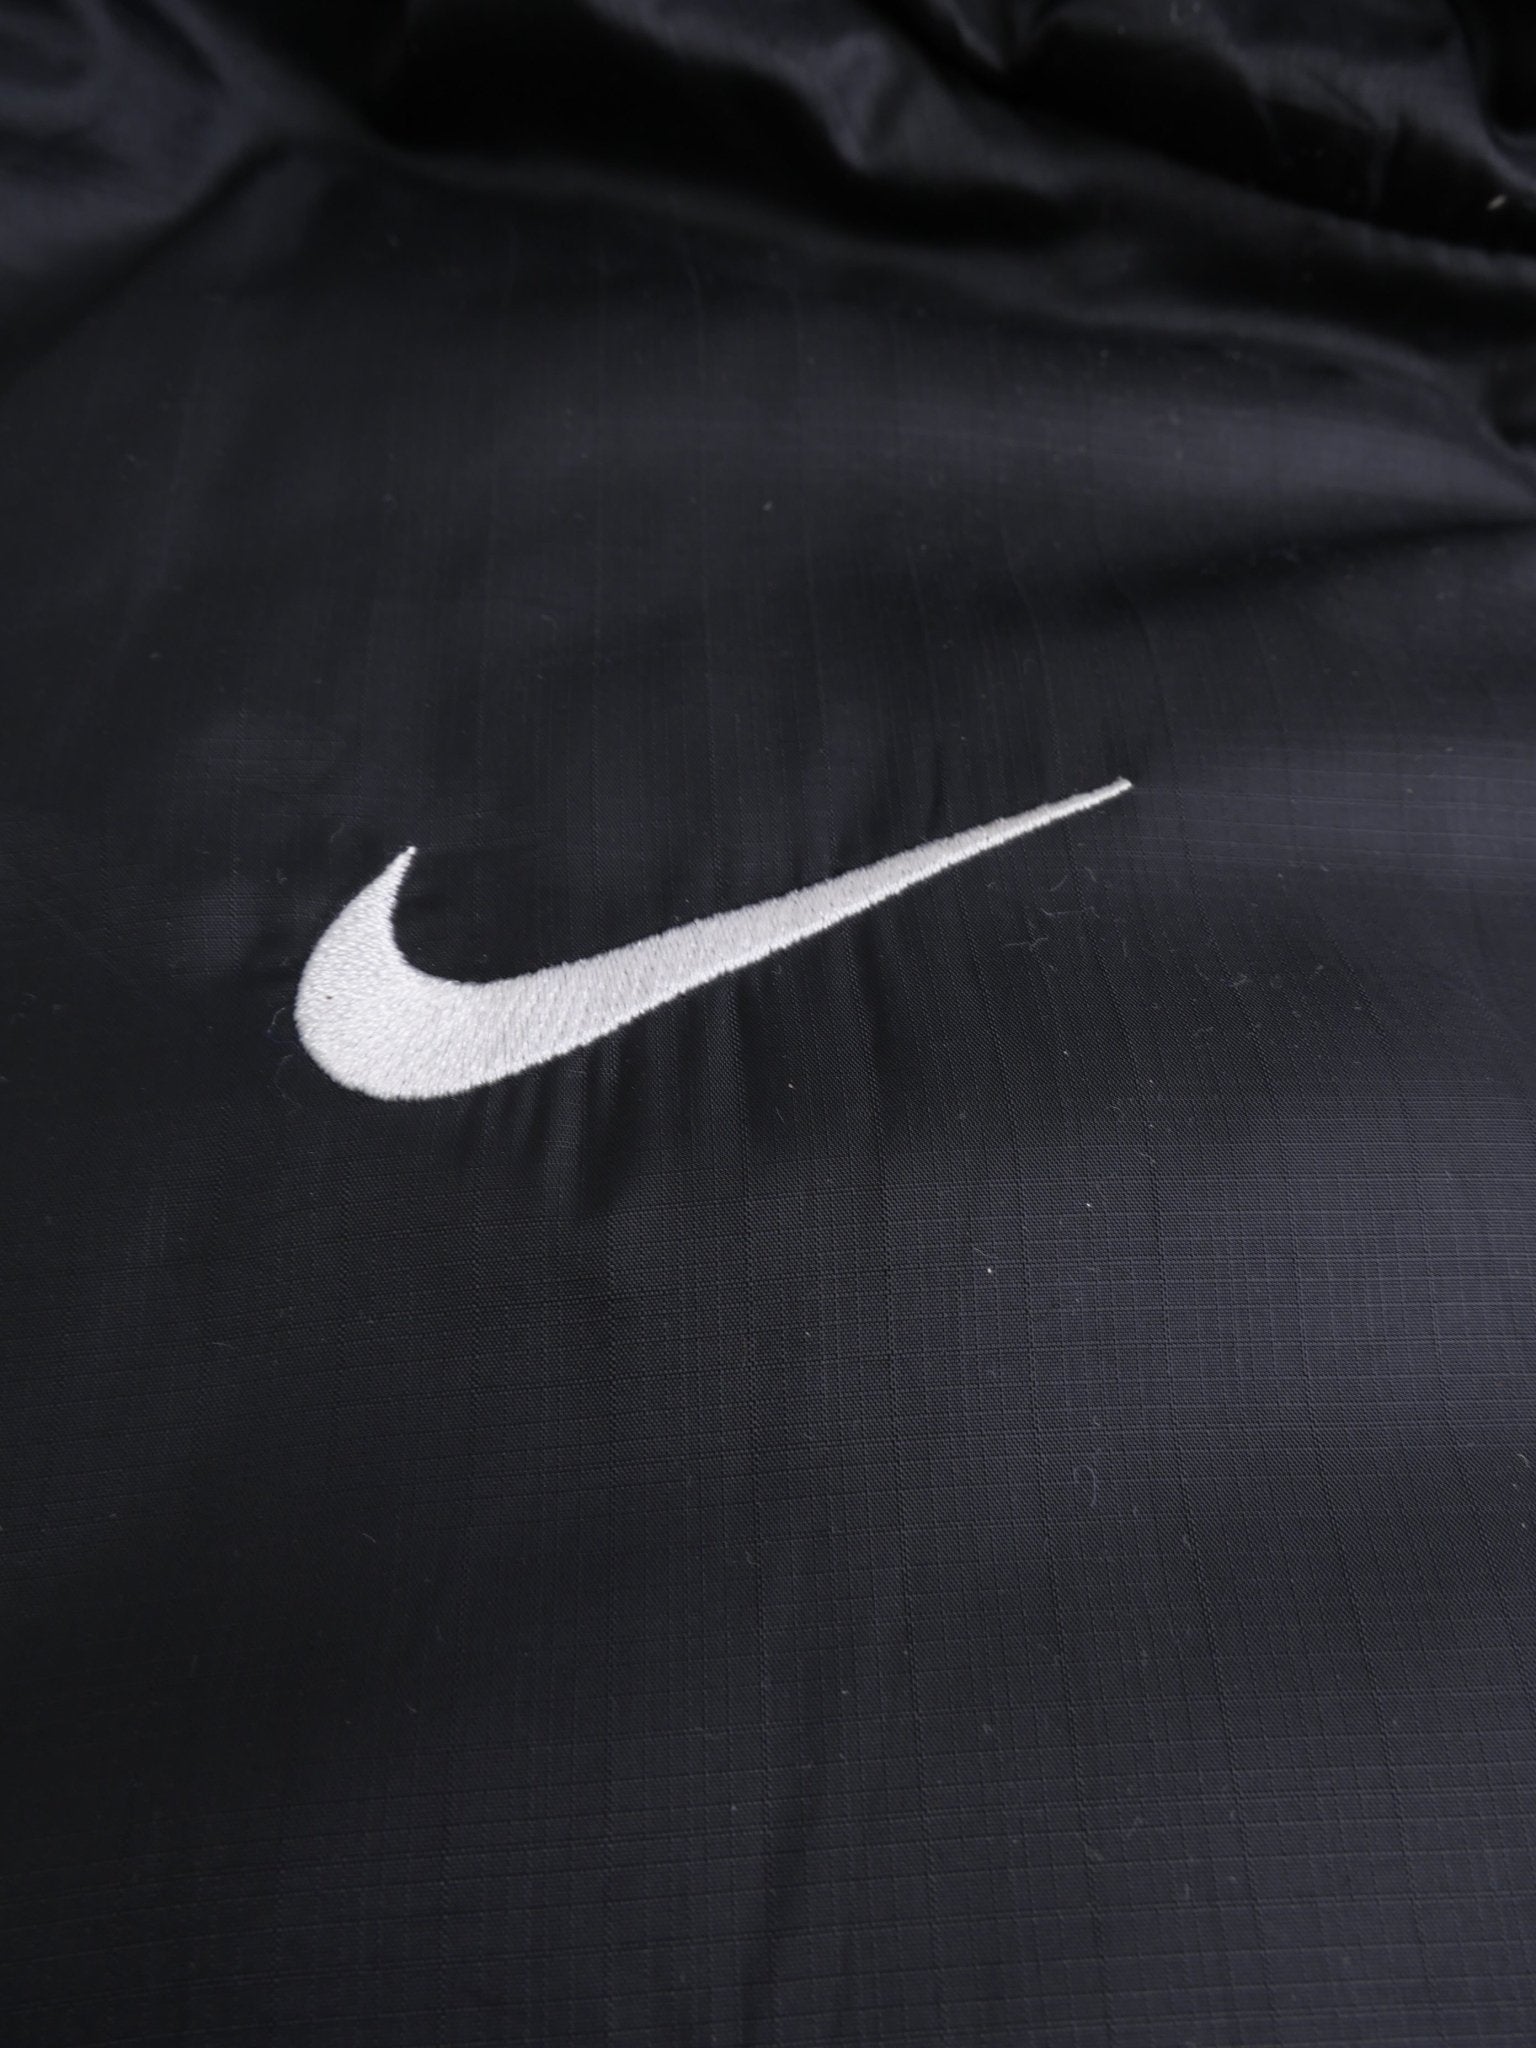 Nike embroidered Swoosh black thick Jacket - Peeces